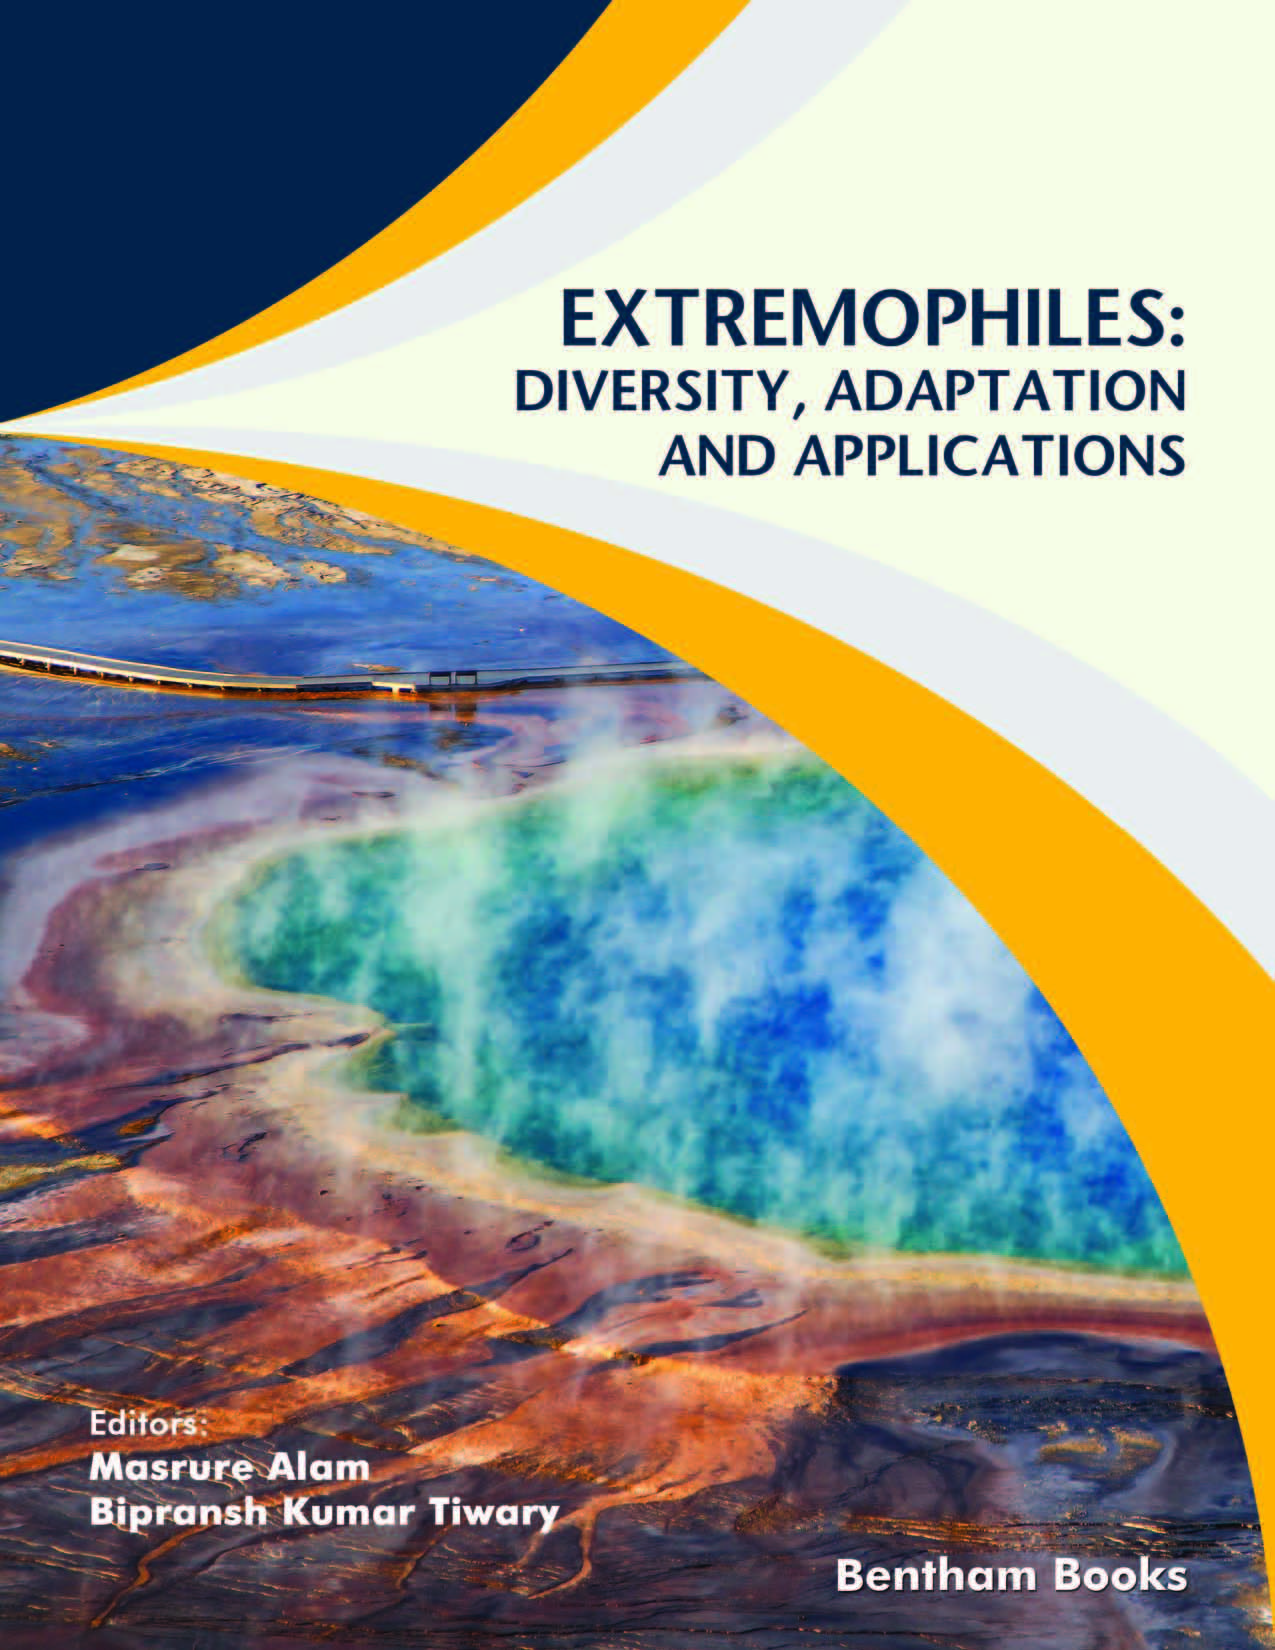 Extremophiles: Diversity, Adaptation and Applications